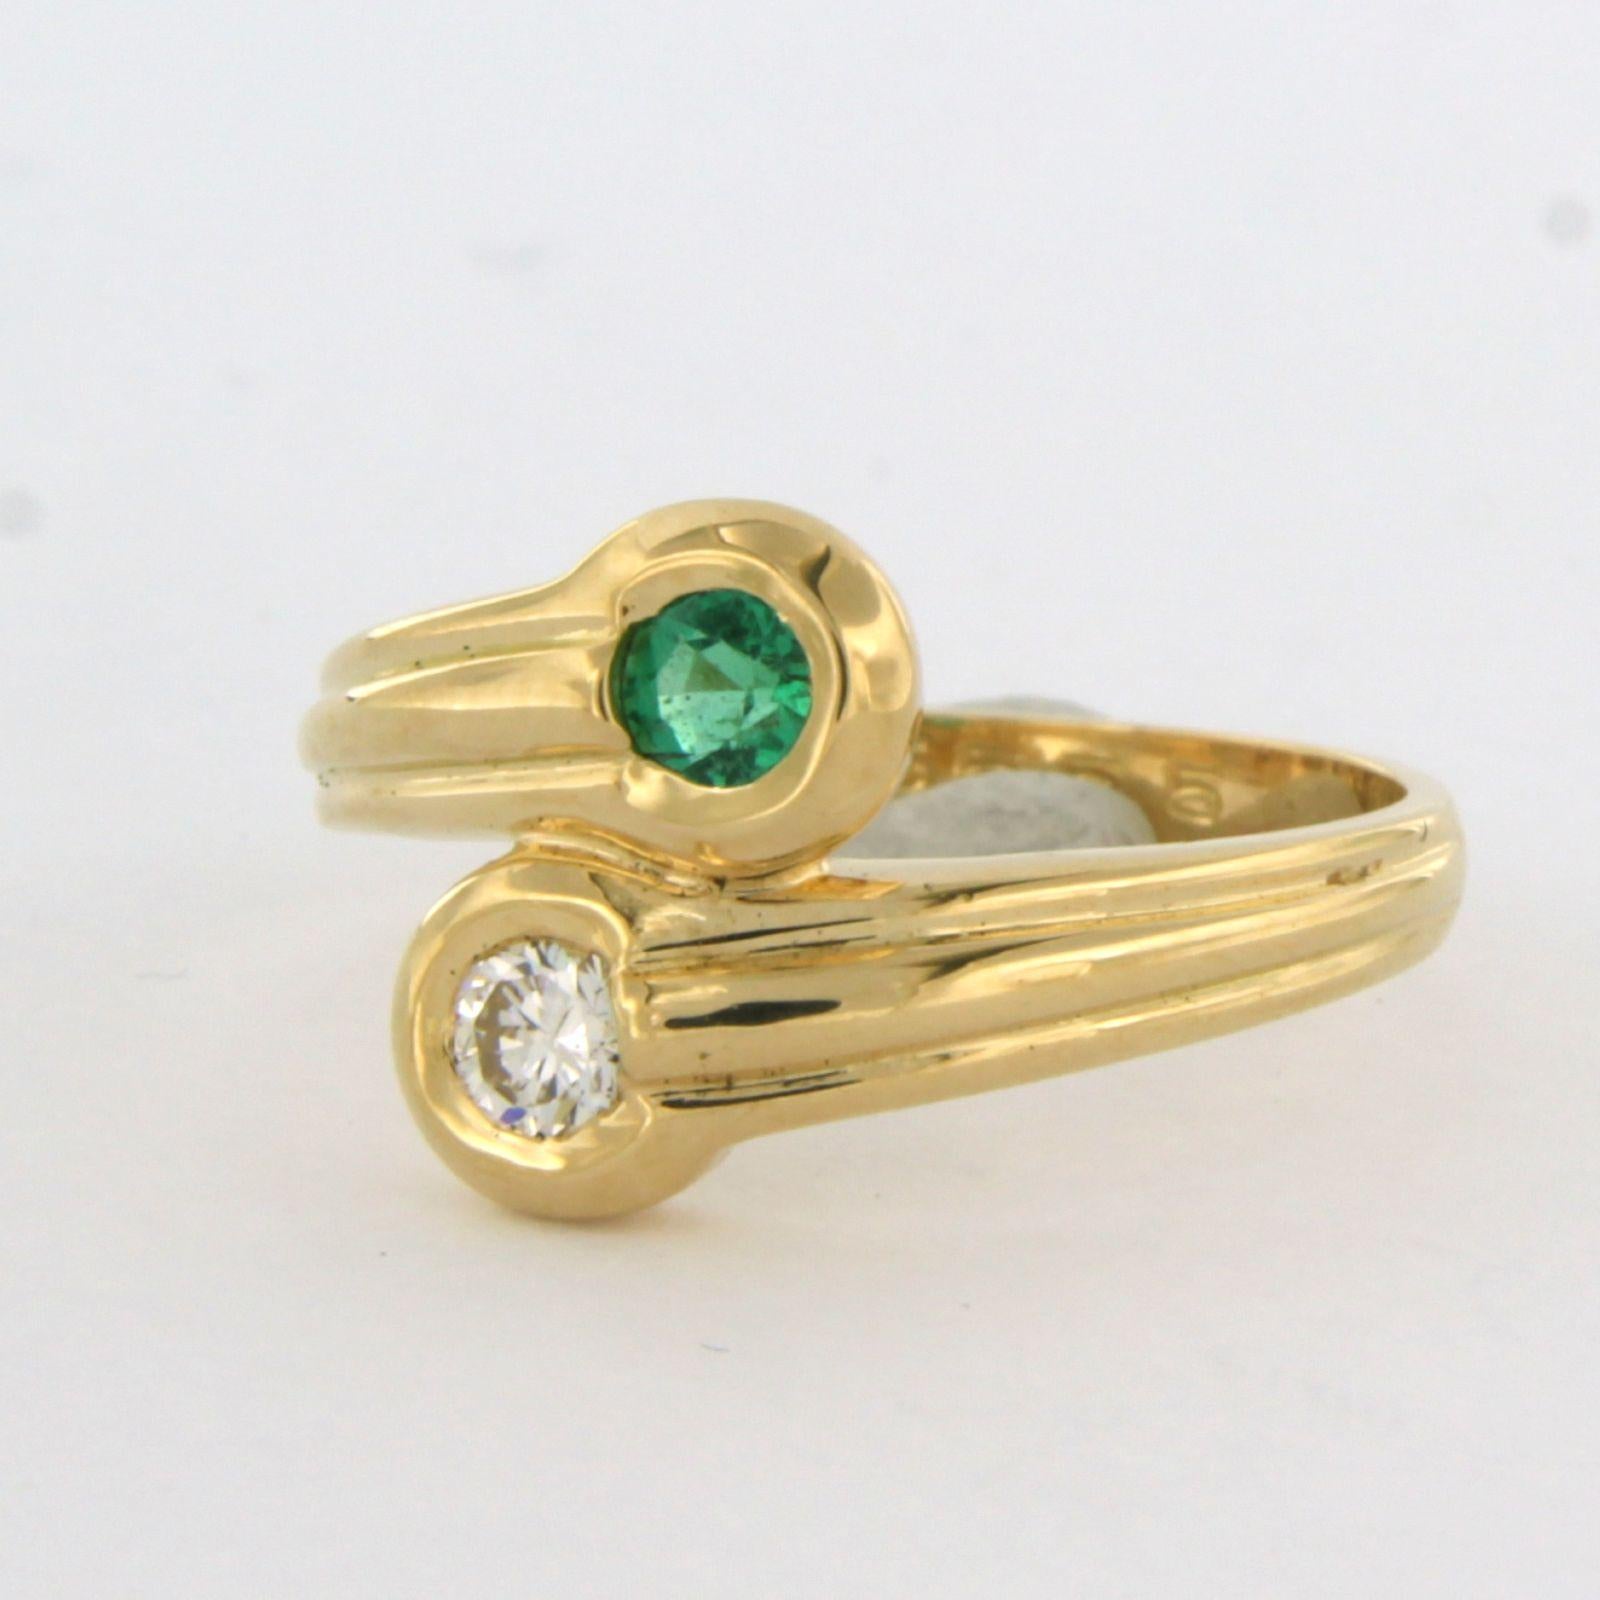 Brilliant Cut Ring with emerald and diamond 18k yellow gold